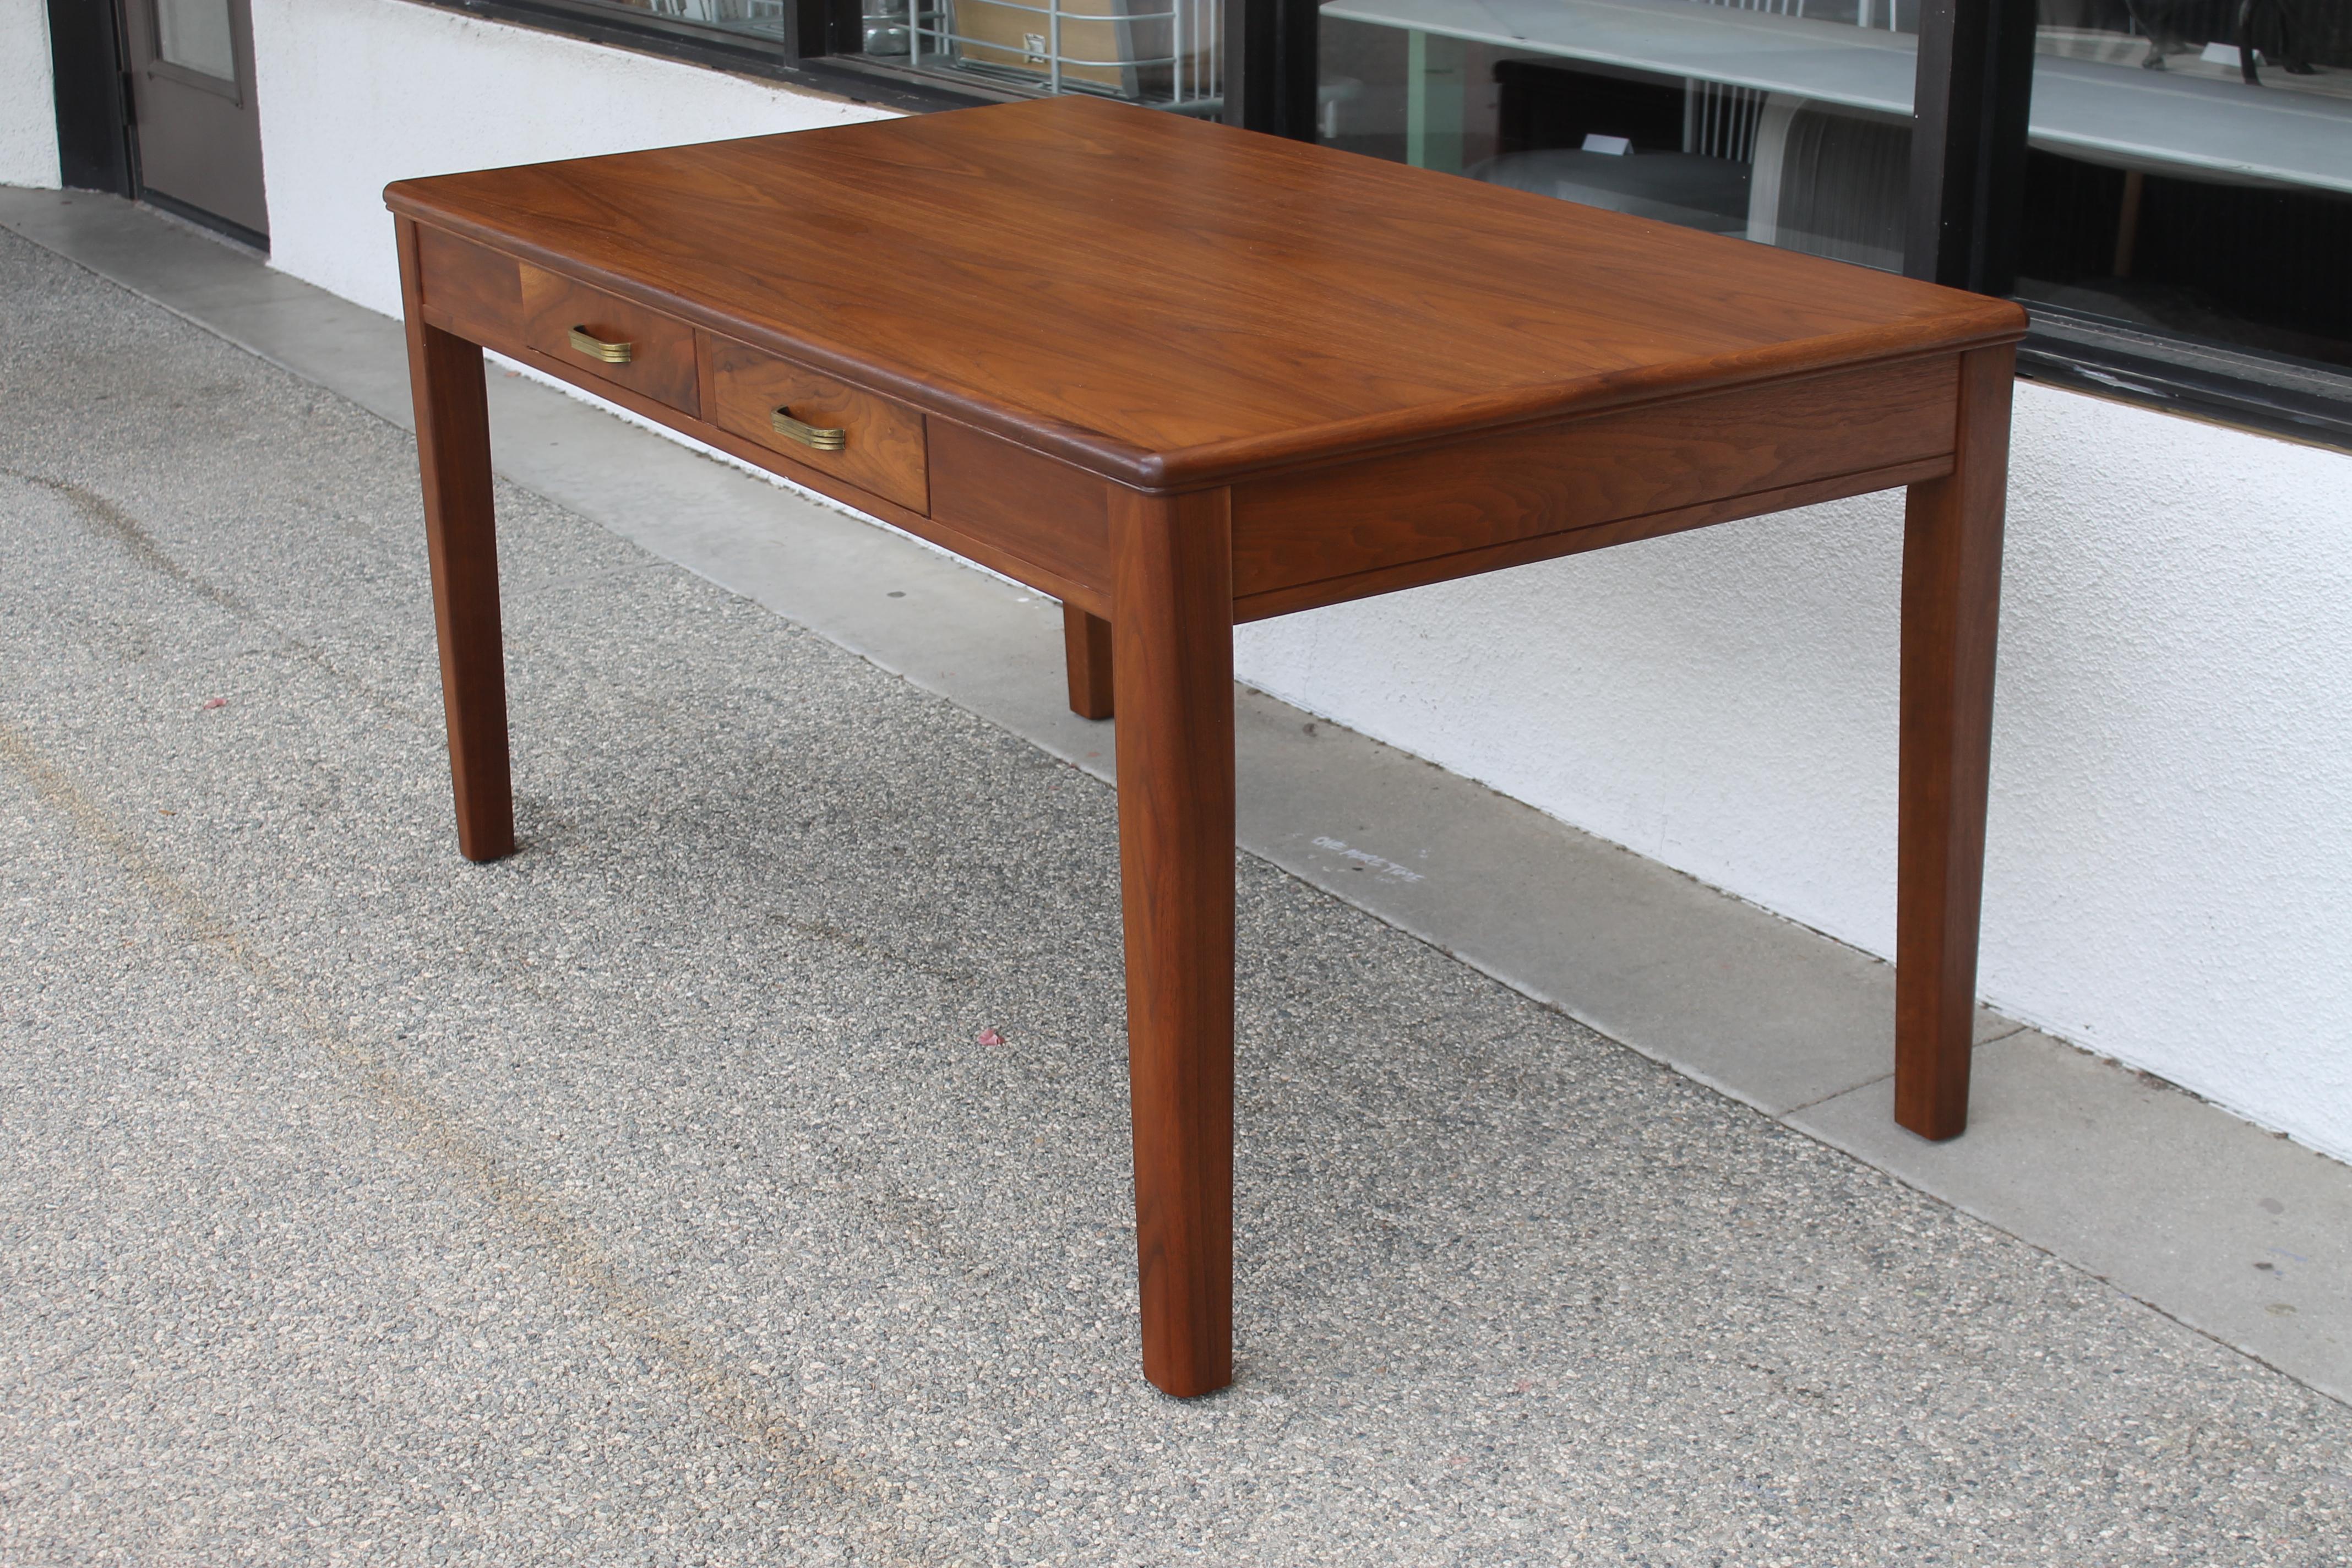 A Mid-Century Modern walnut writing table or desk made by the Leopold Company with two drawers and brass hardware. Paper label attached stating The Leopold Company, Burlington, Iowa U.S.A. Table has been professionally refinished. Table measures 60